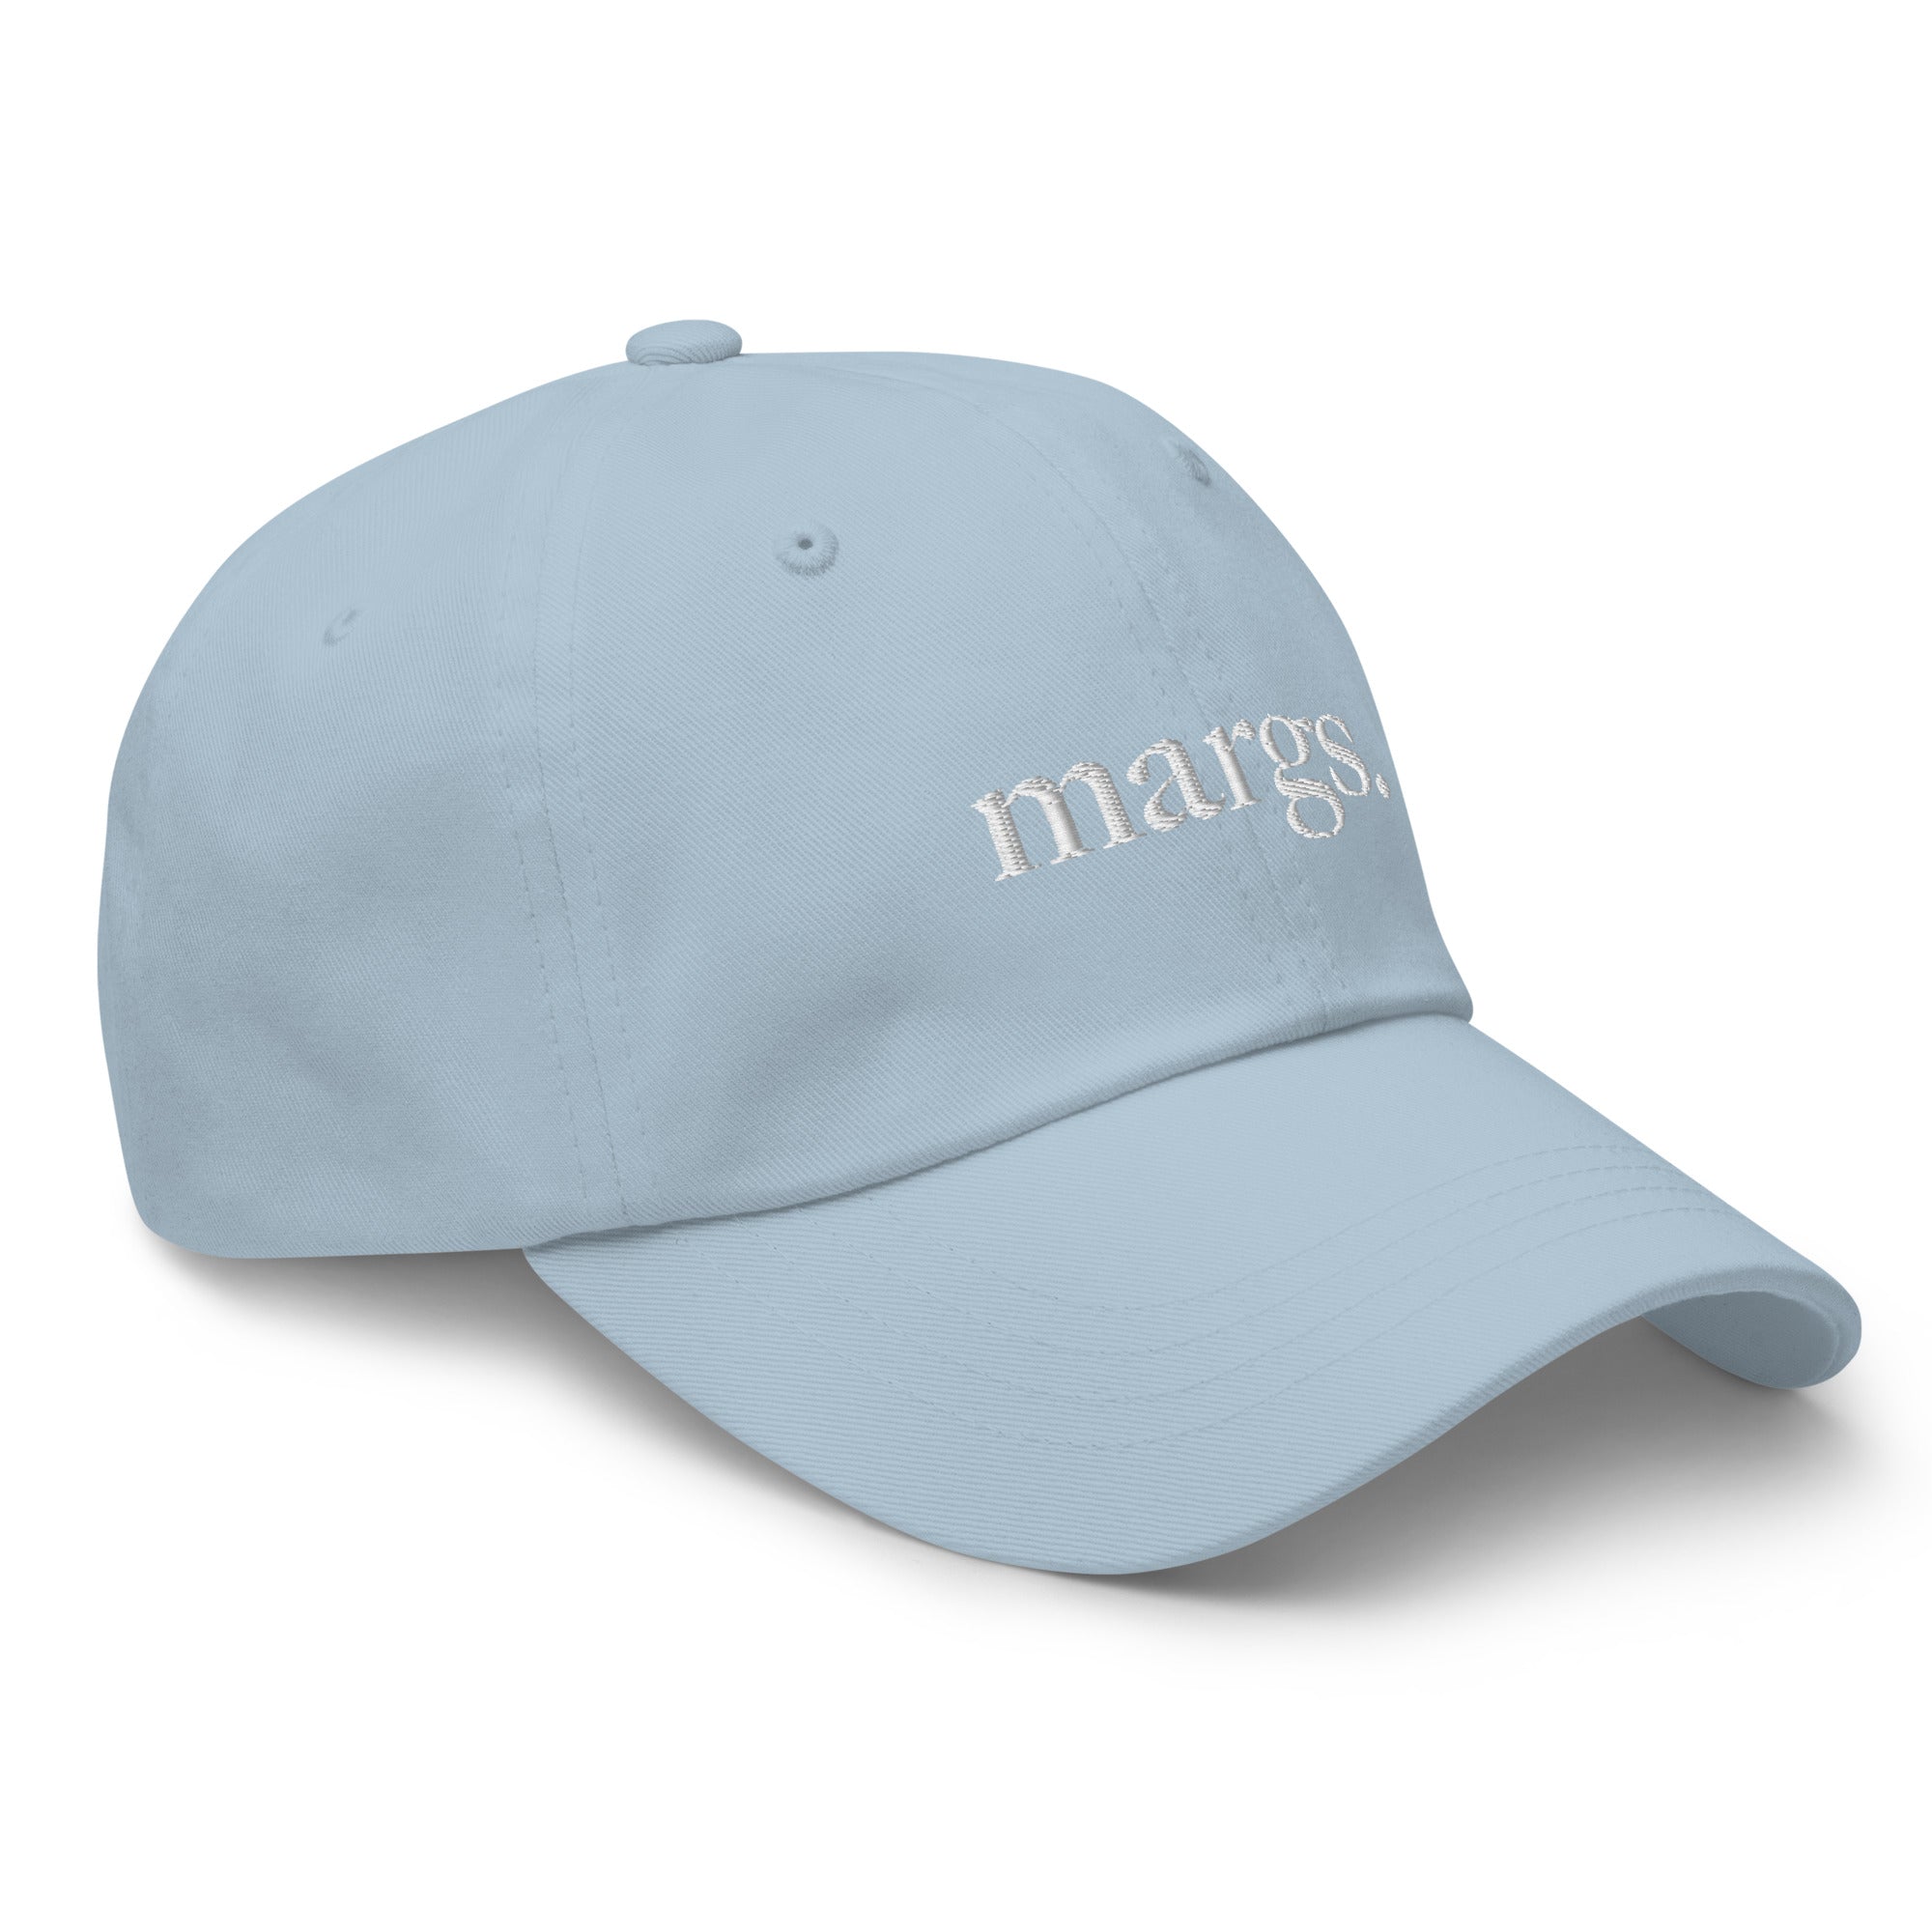 Margs. Dad hat